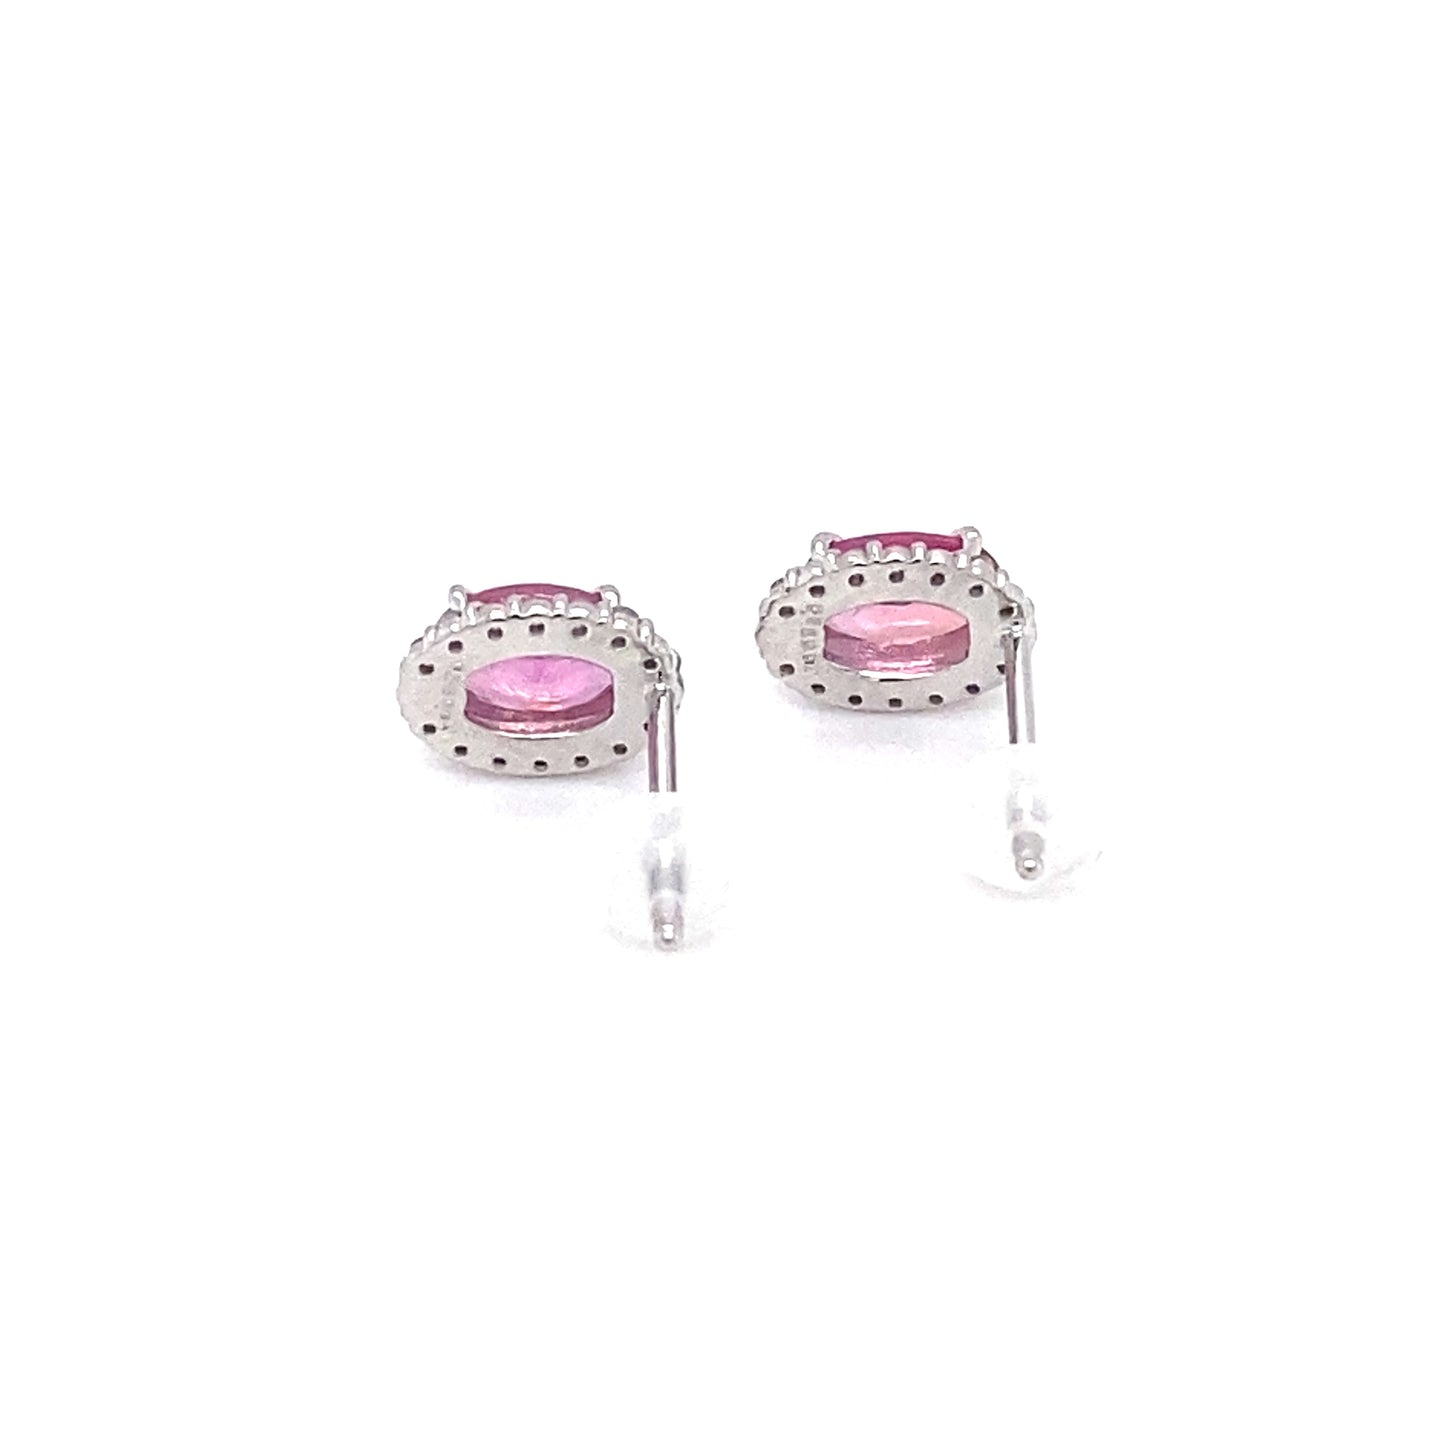 Circa 1990s 1.18ctw Pink Sapphire and Diamond Halo Earrings in 18K White Gold